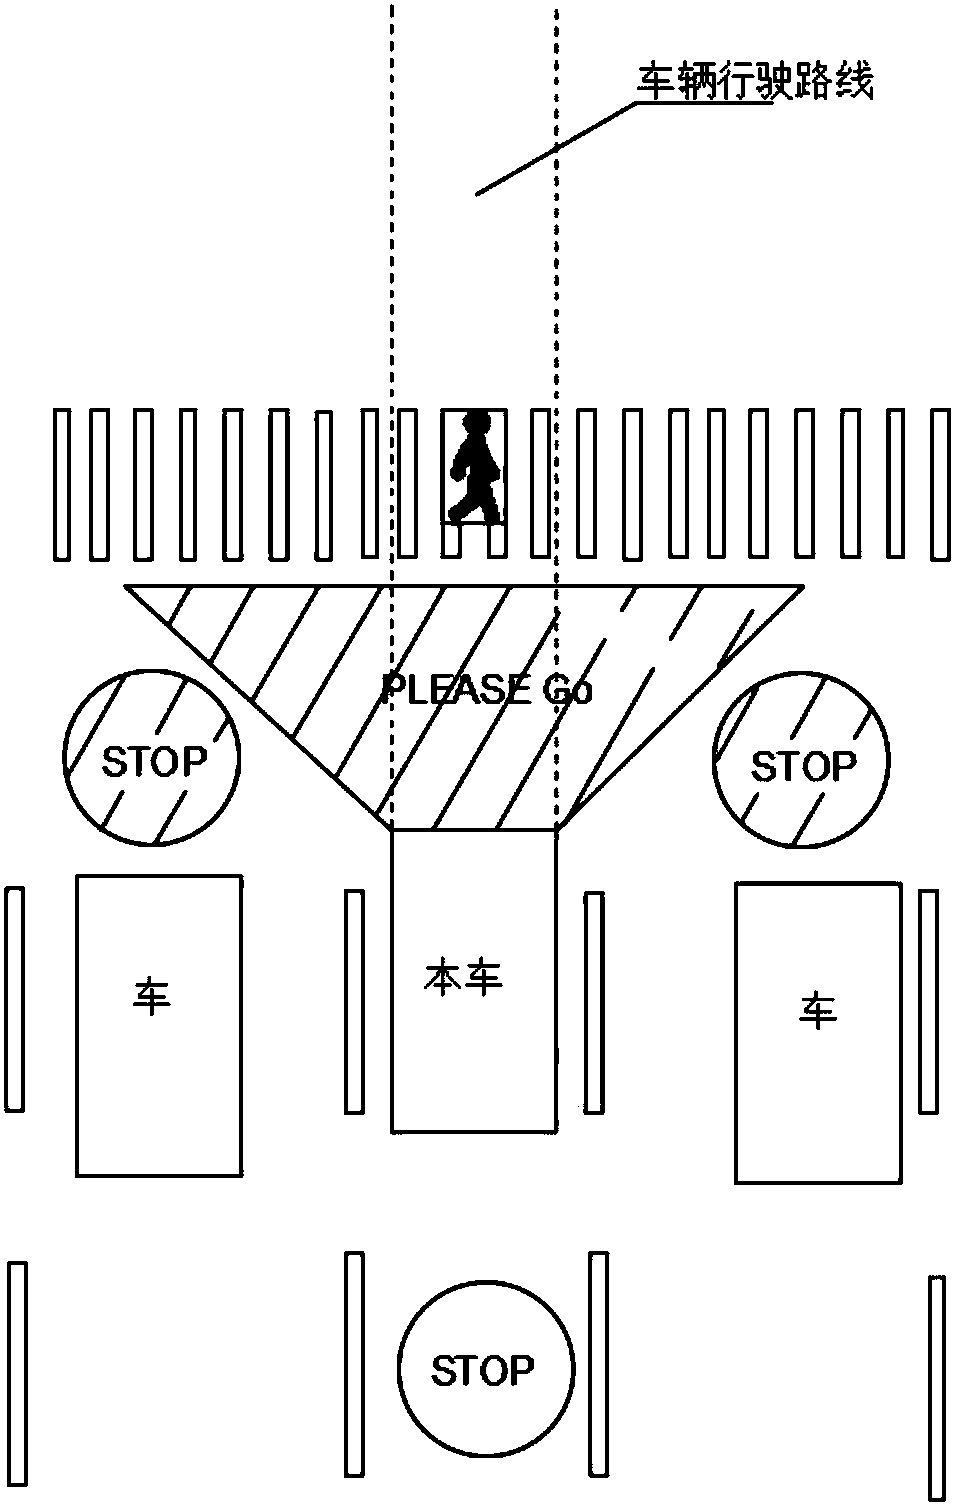 Information interaction system for driverless vehicle and non-intelligent traffic participants